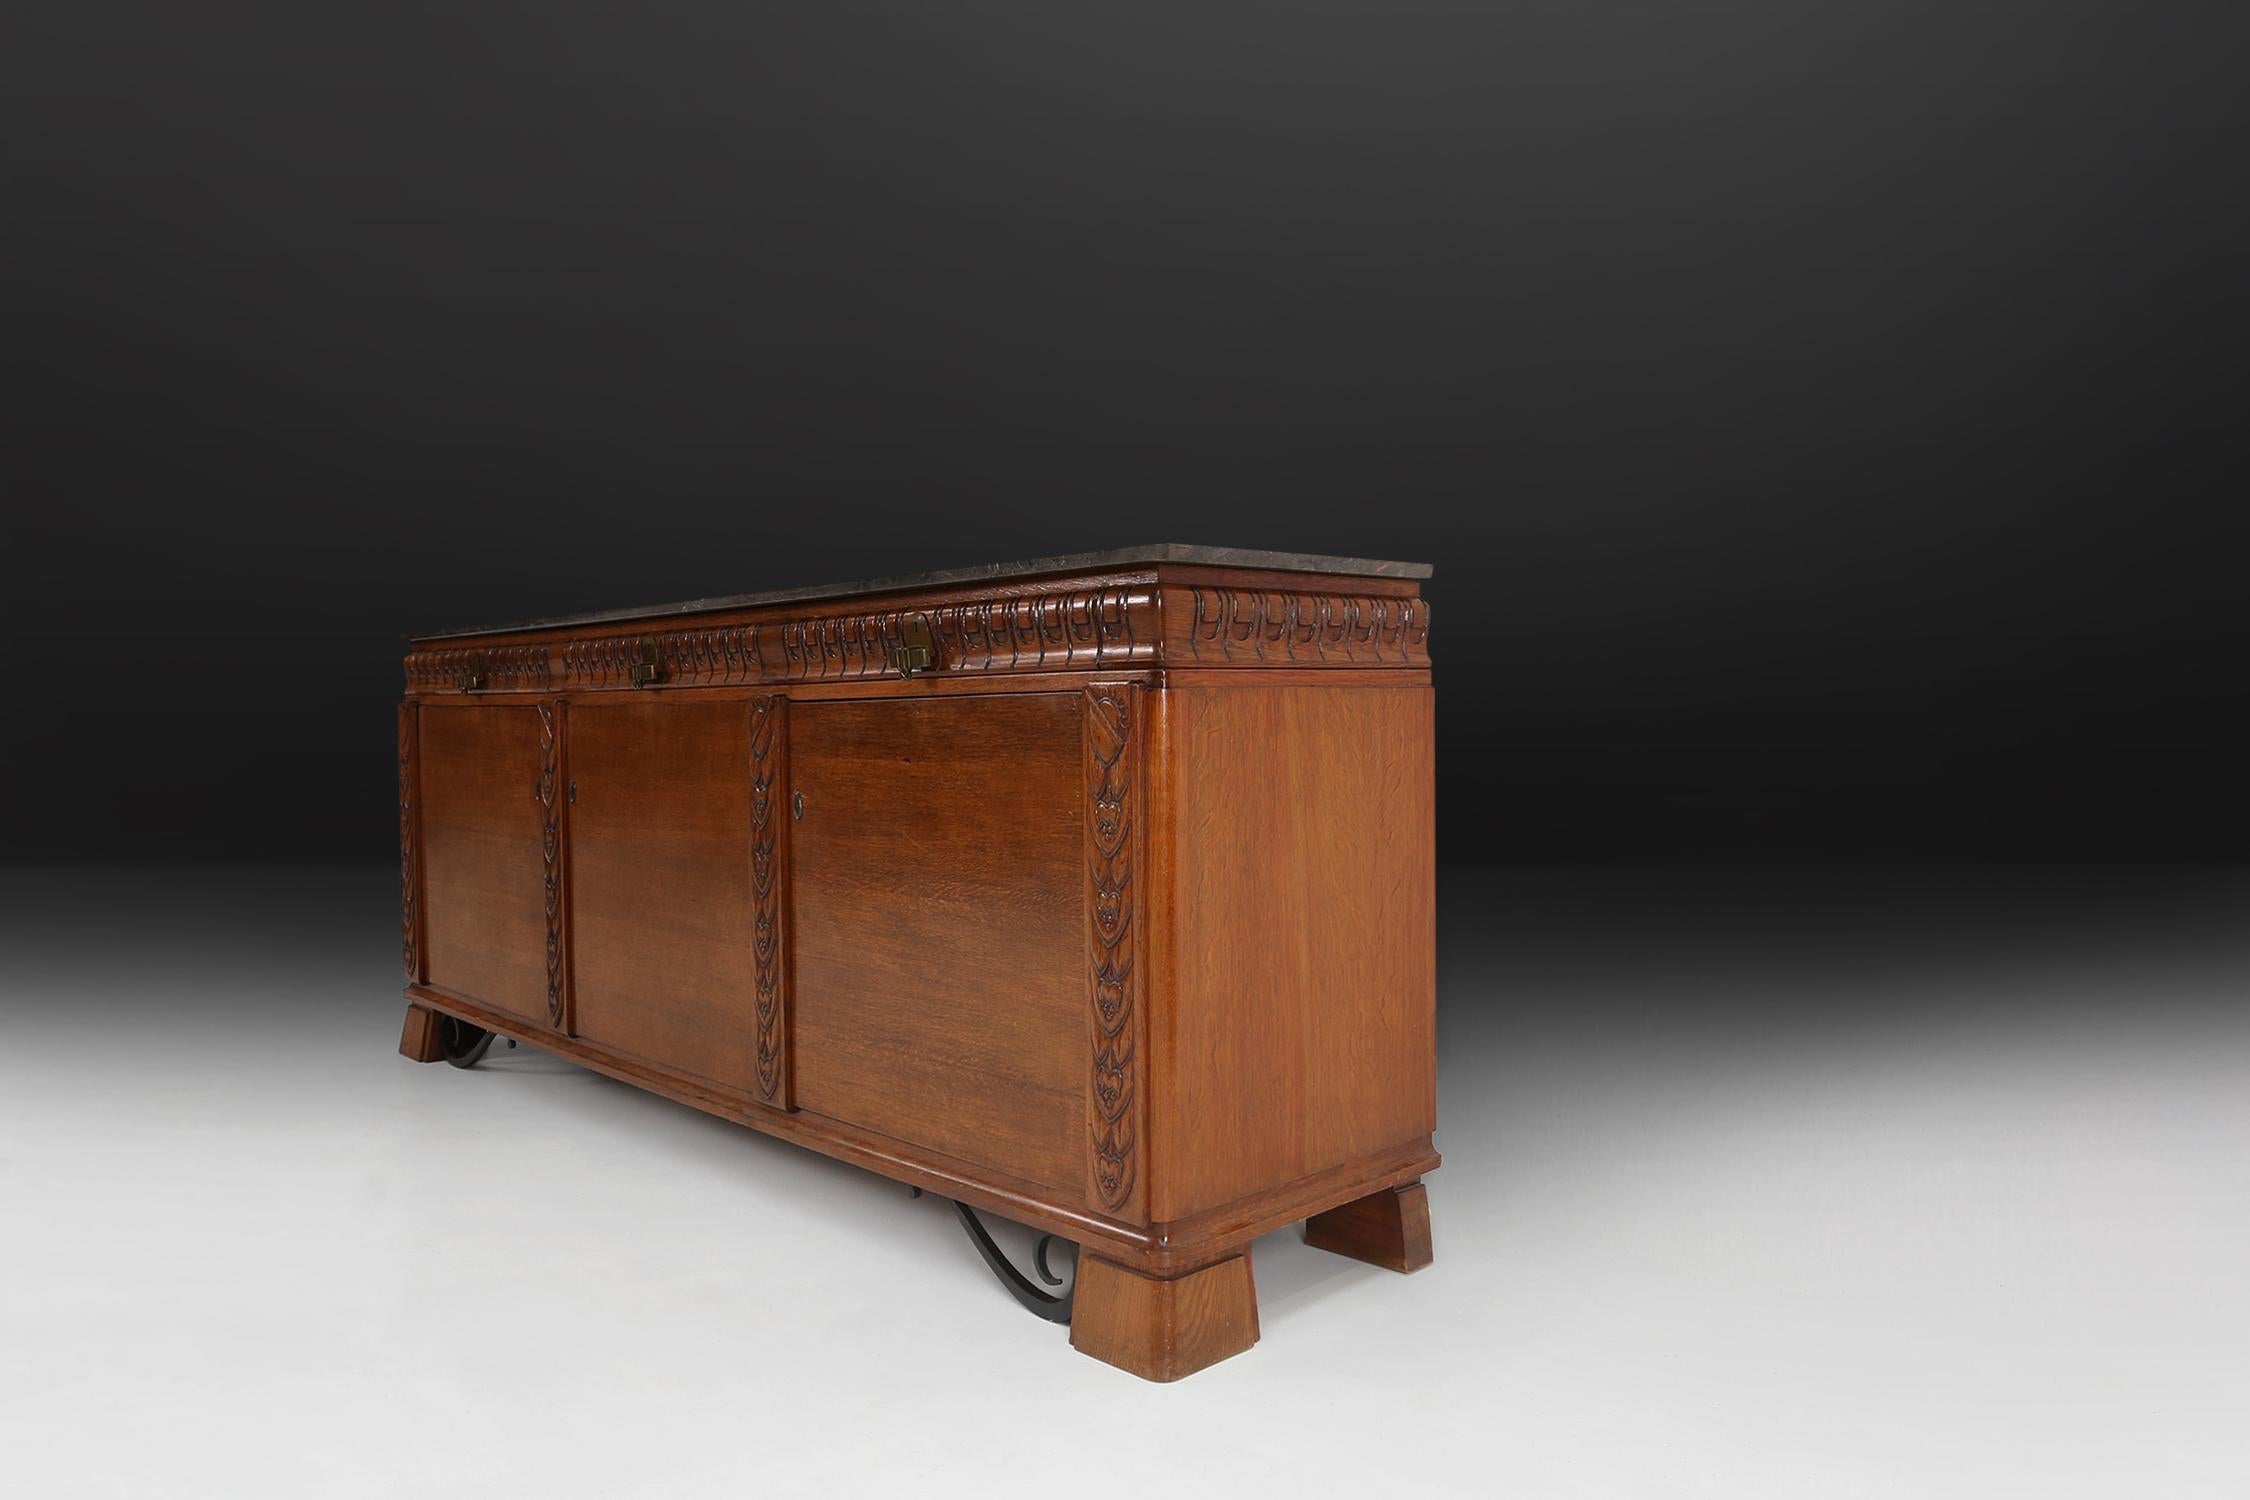 Large Art Deco sideboard made in the 1940s with some great sculptural details in the wood and metal details on the base. With a beautiful grey marble top.